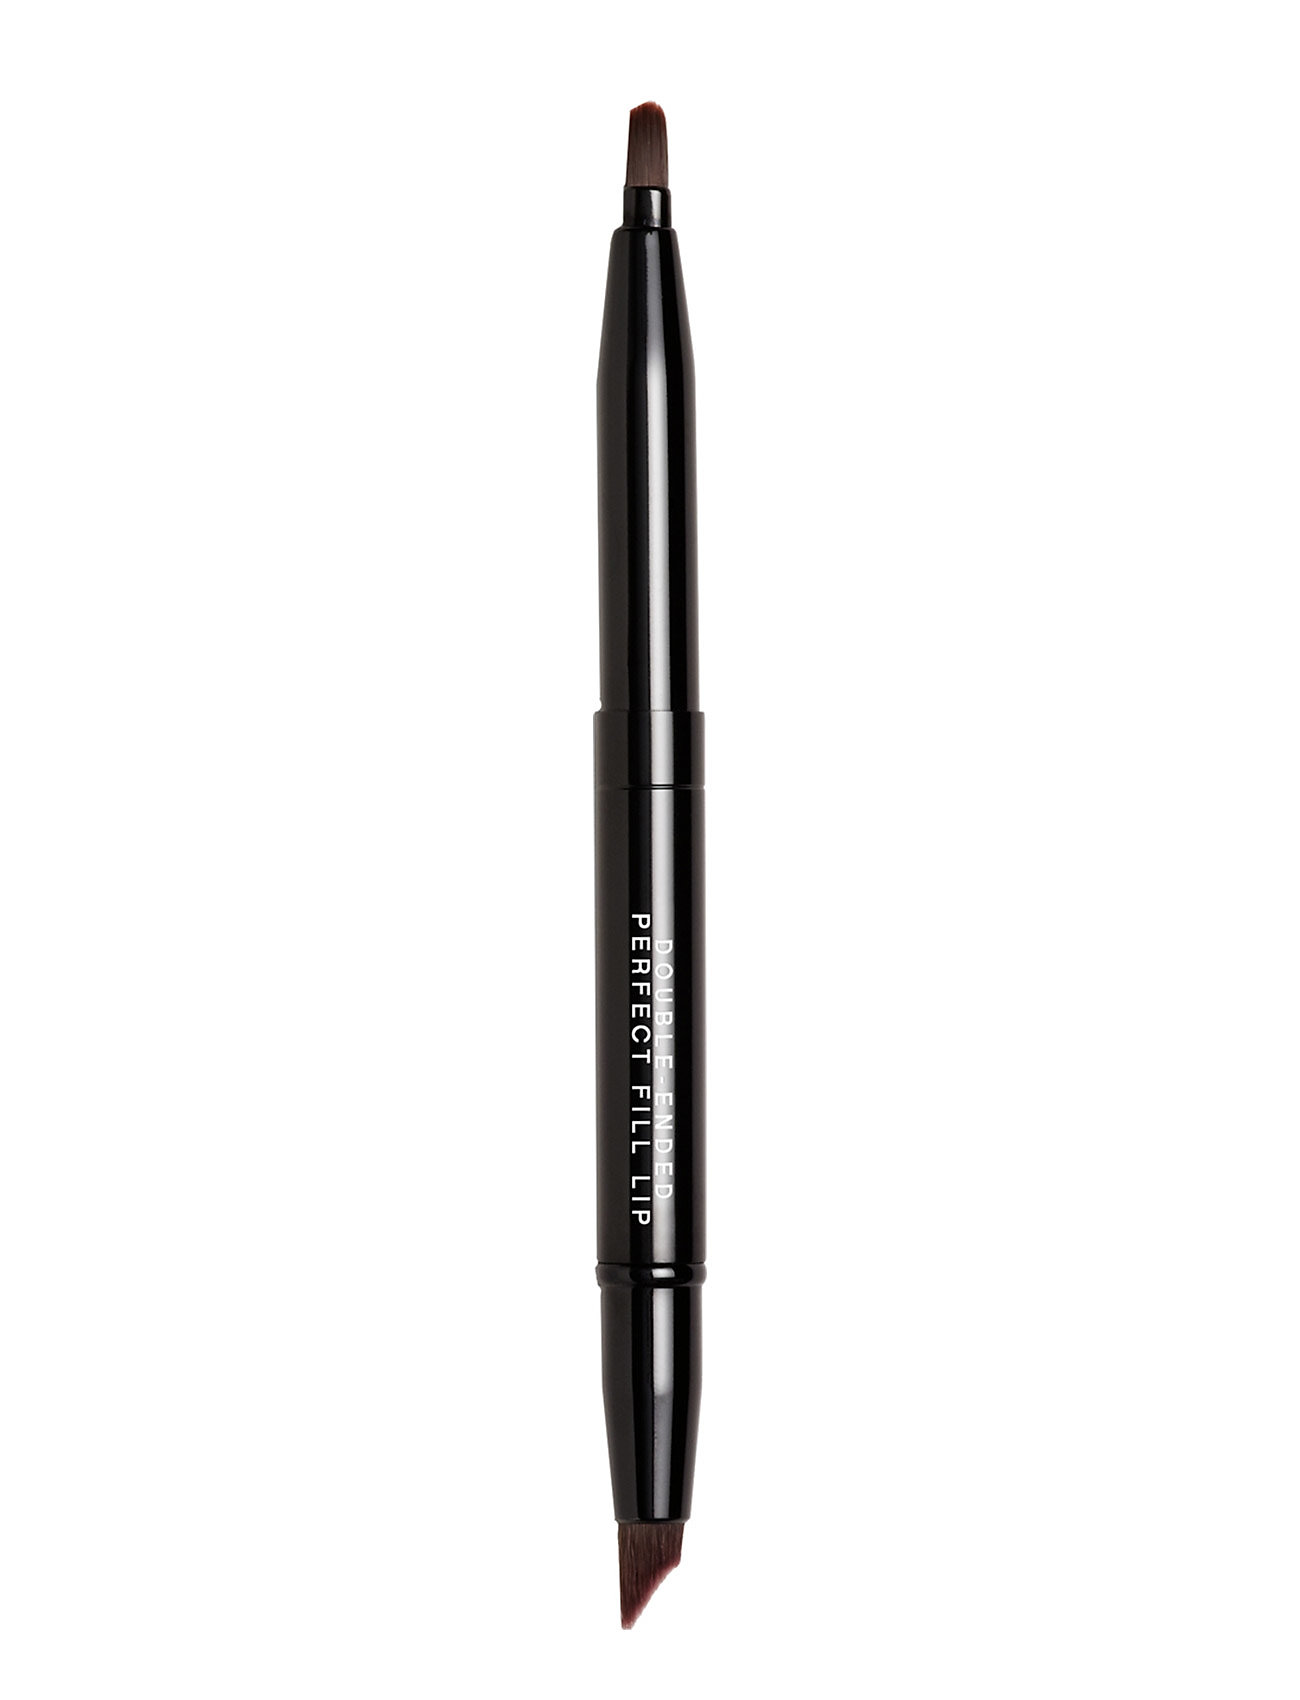 Double Ended Perfect Fill Lip Brush Beauty WOMEN Makeup Makeup Brushes Lip Brushes Nude BareMinerals, bareMinerals